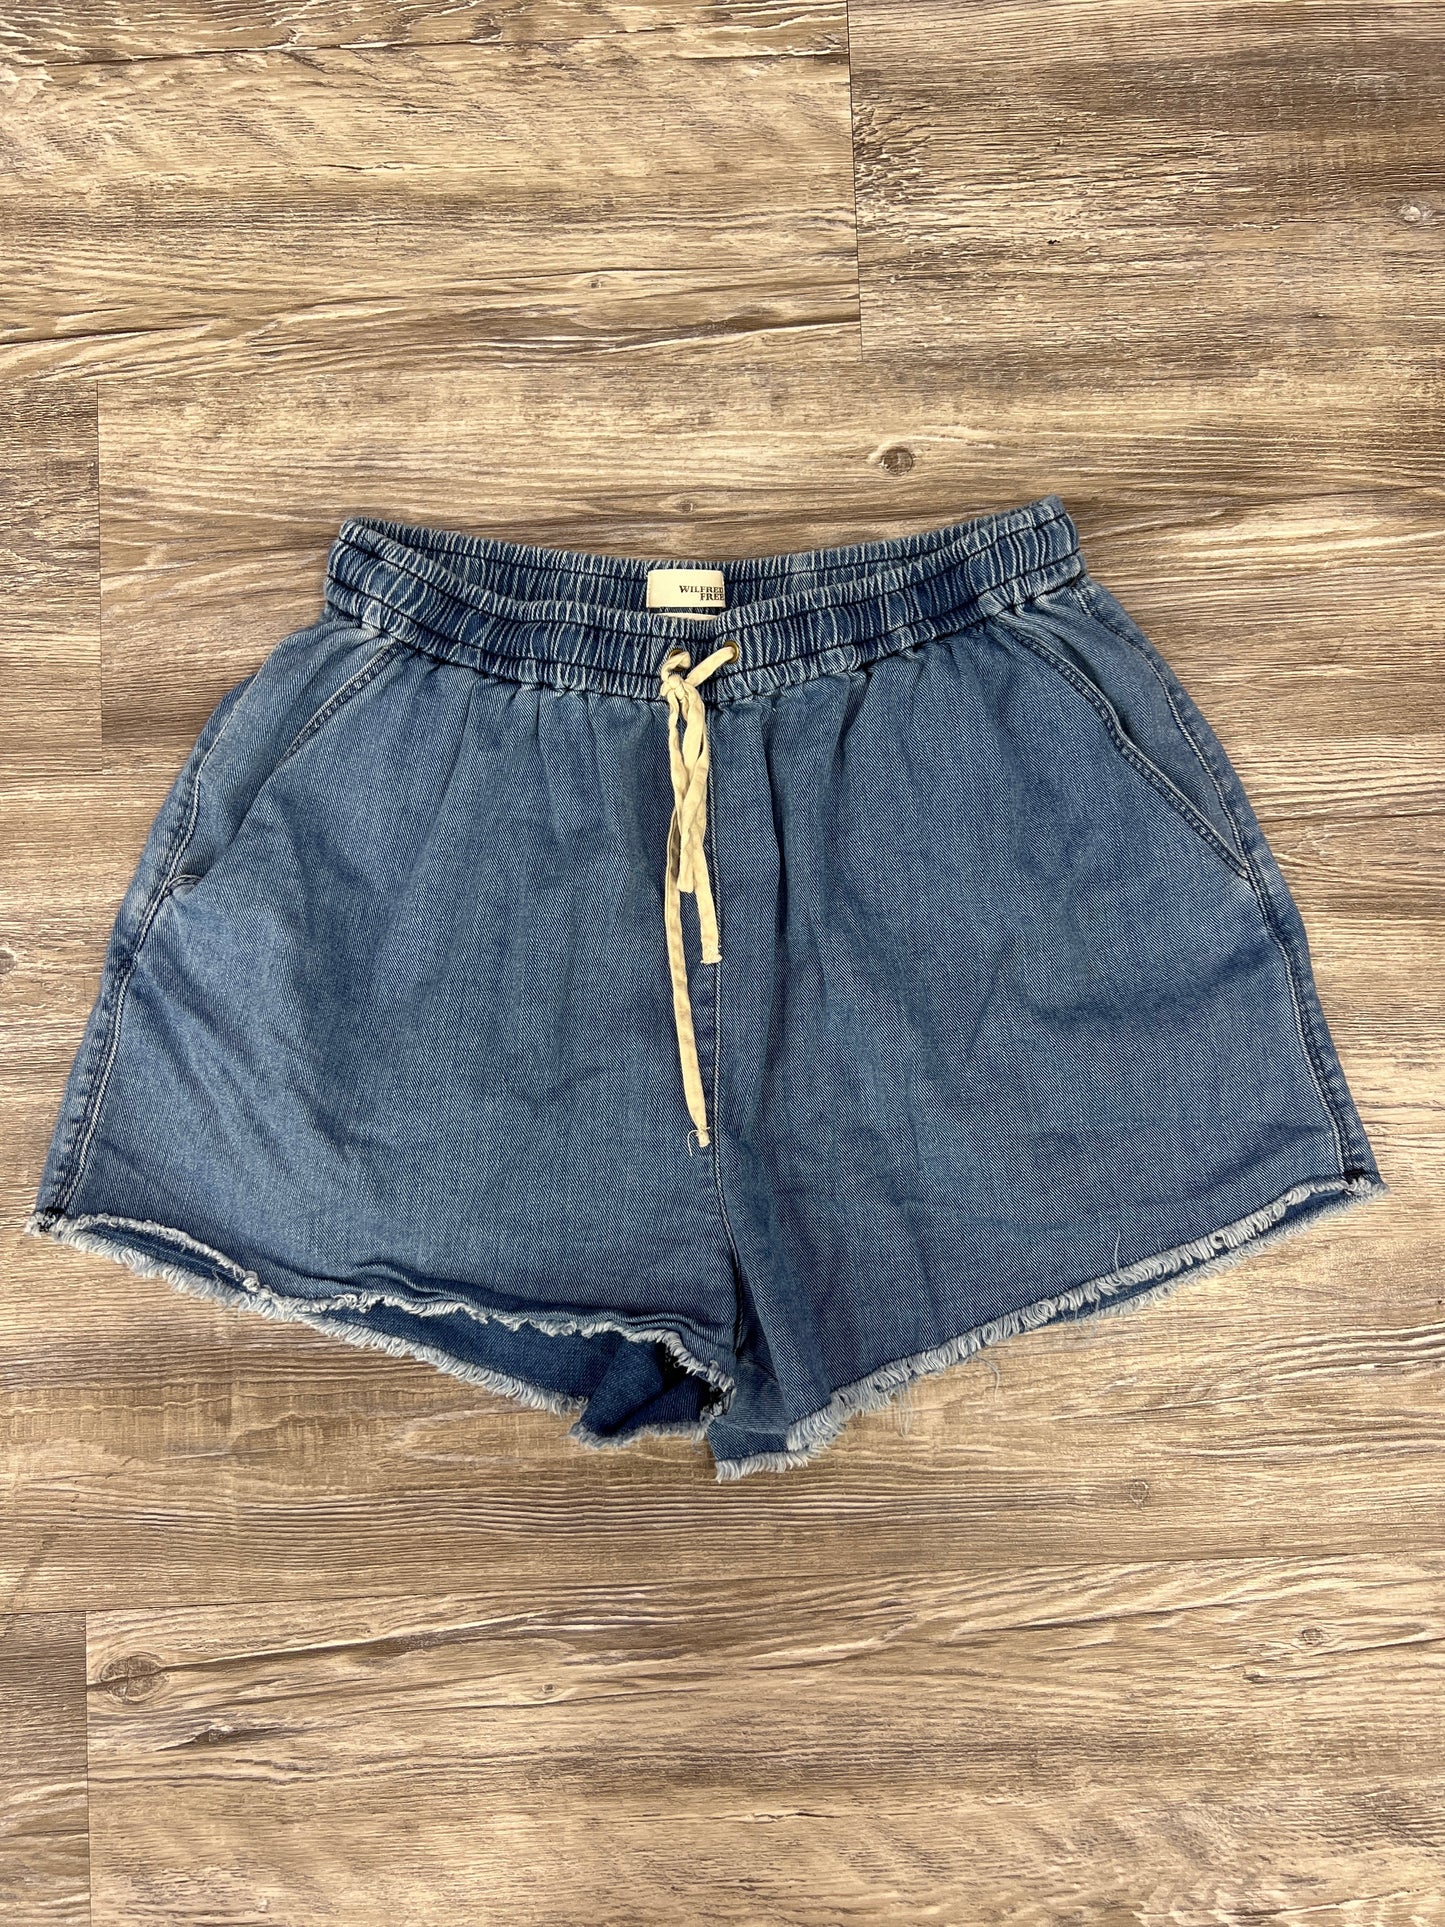 Shorts By Wilfred Size: M